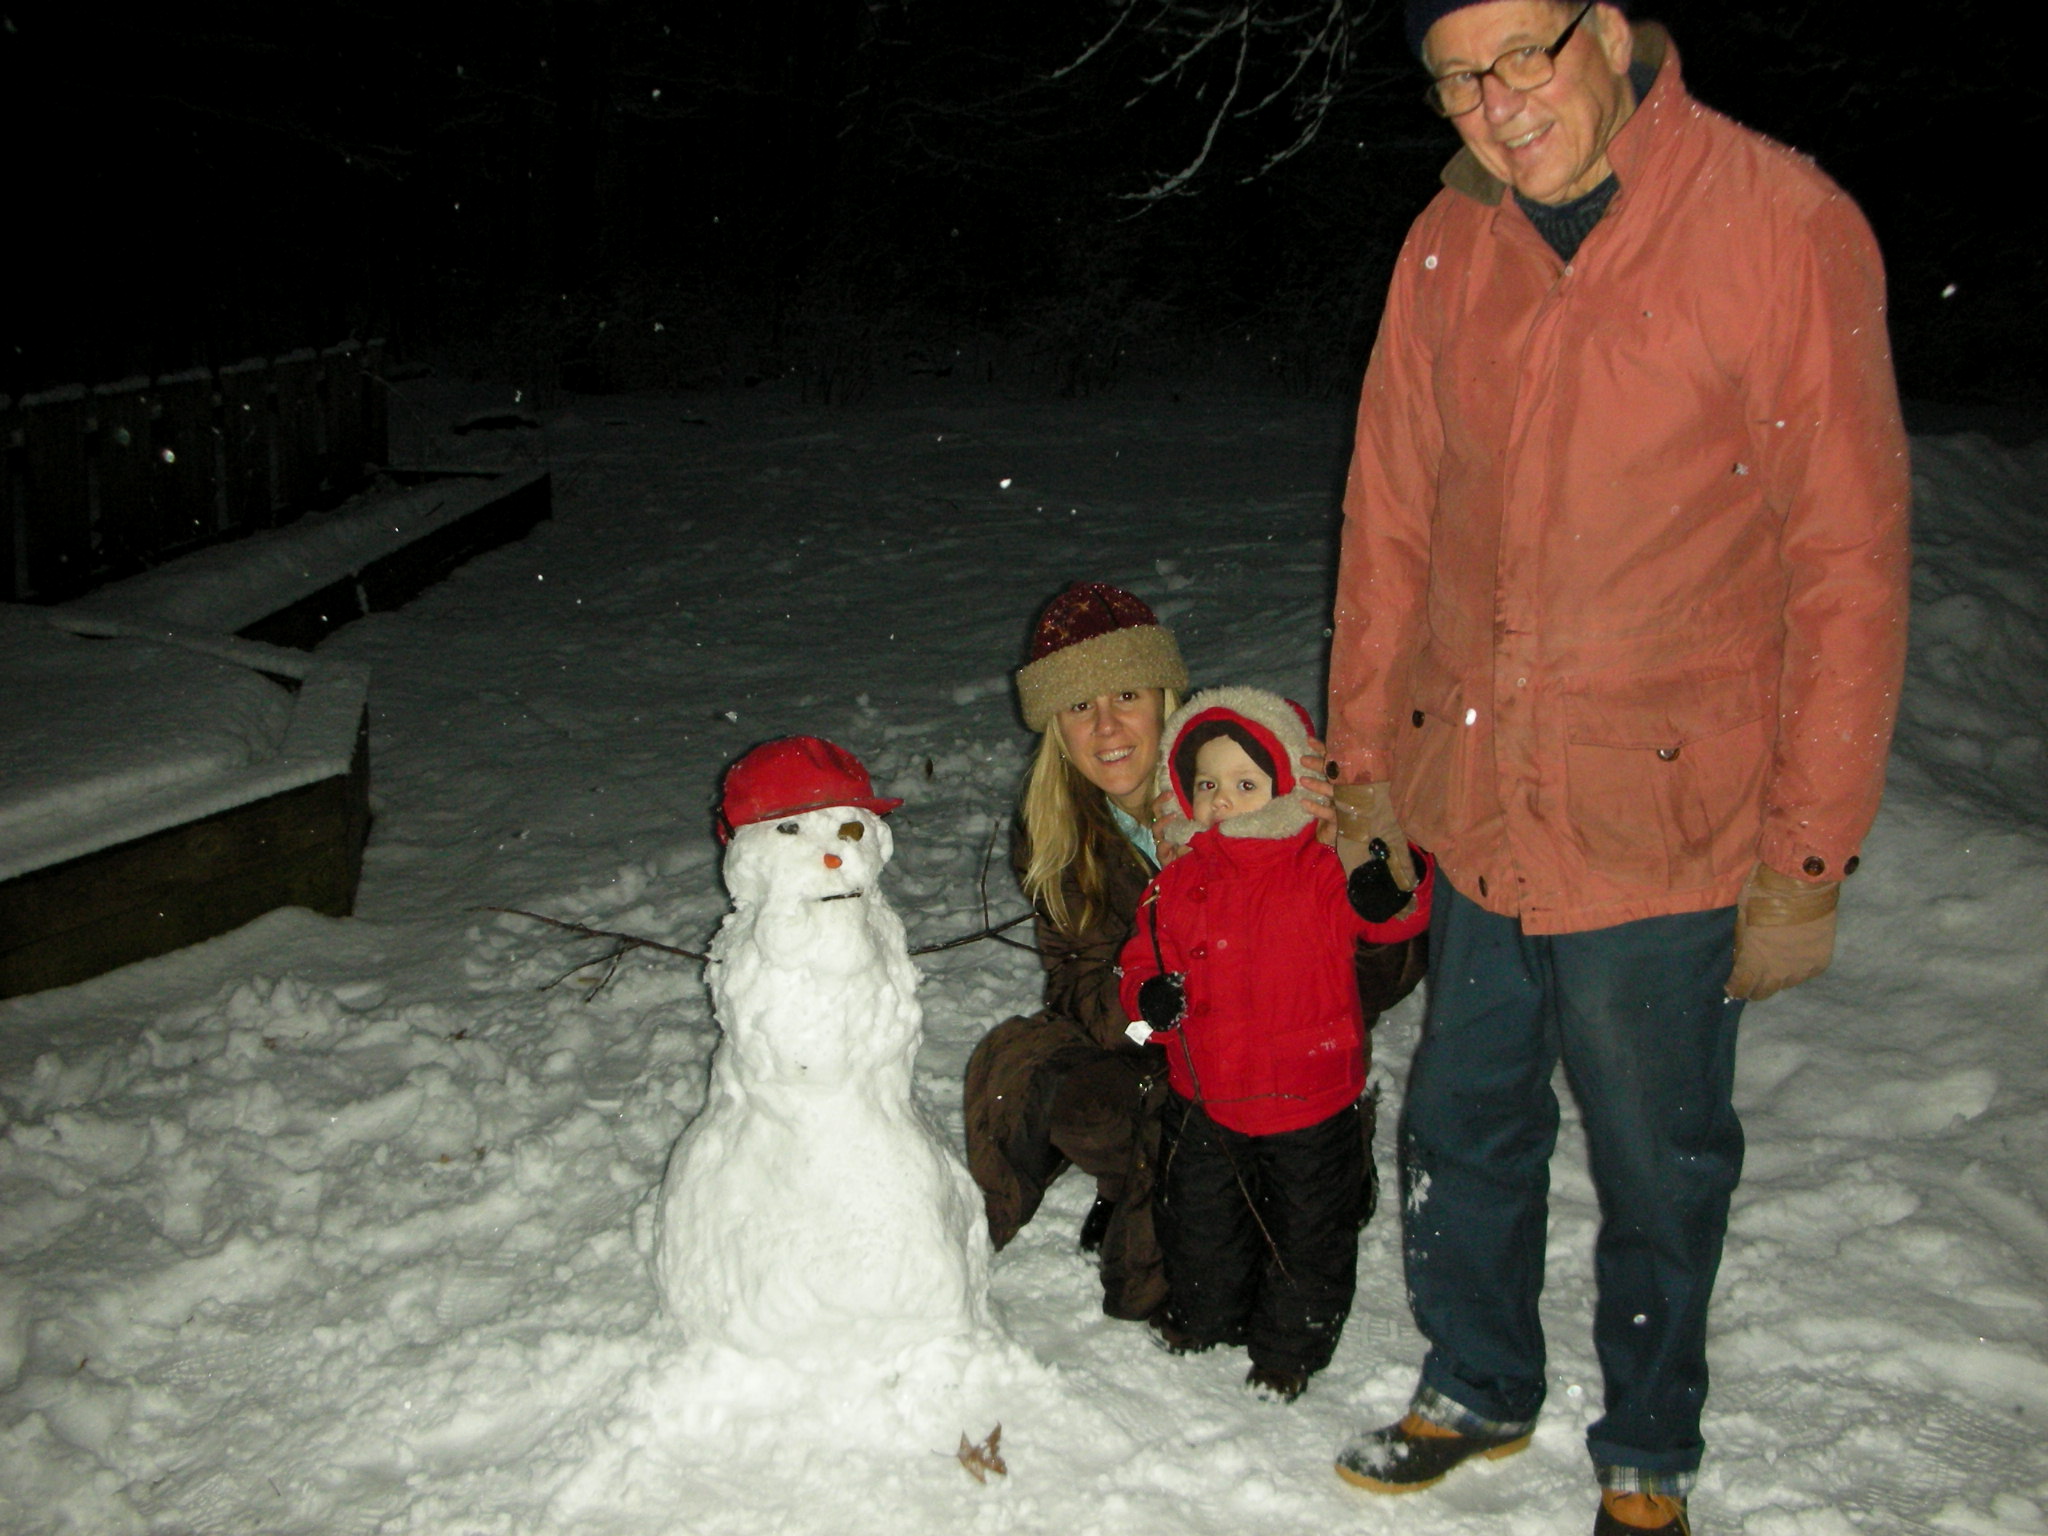 Dylan Building a Snowman with Victoria and Dennis